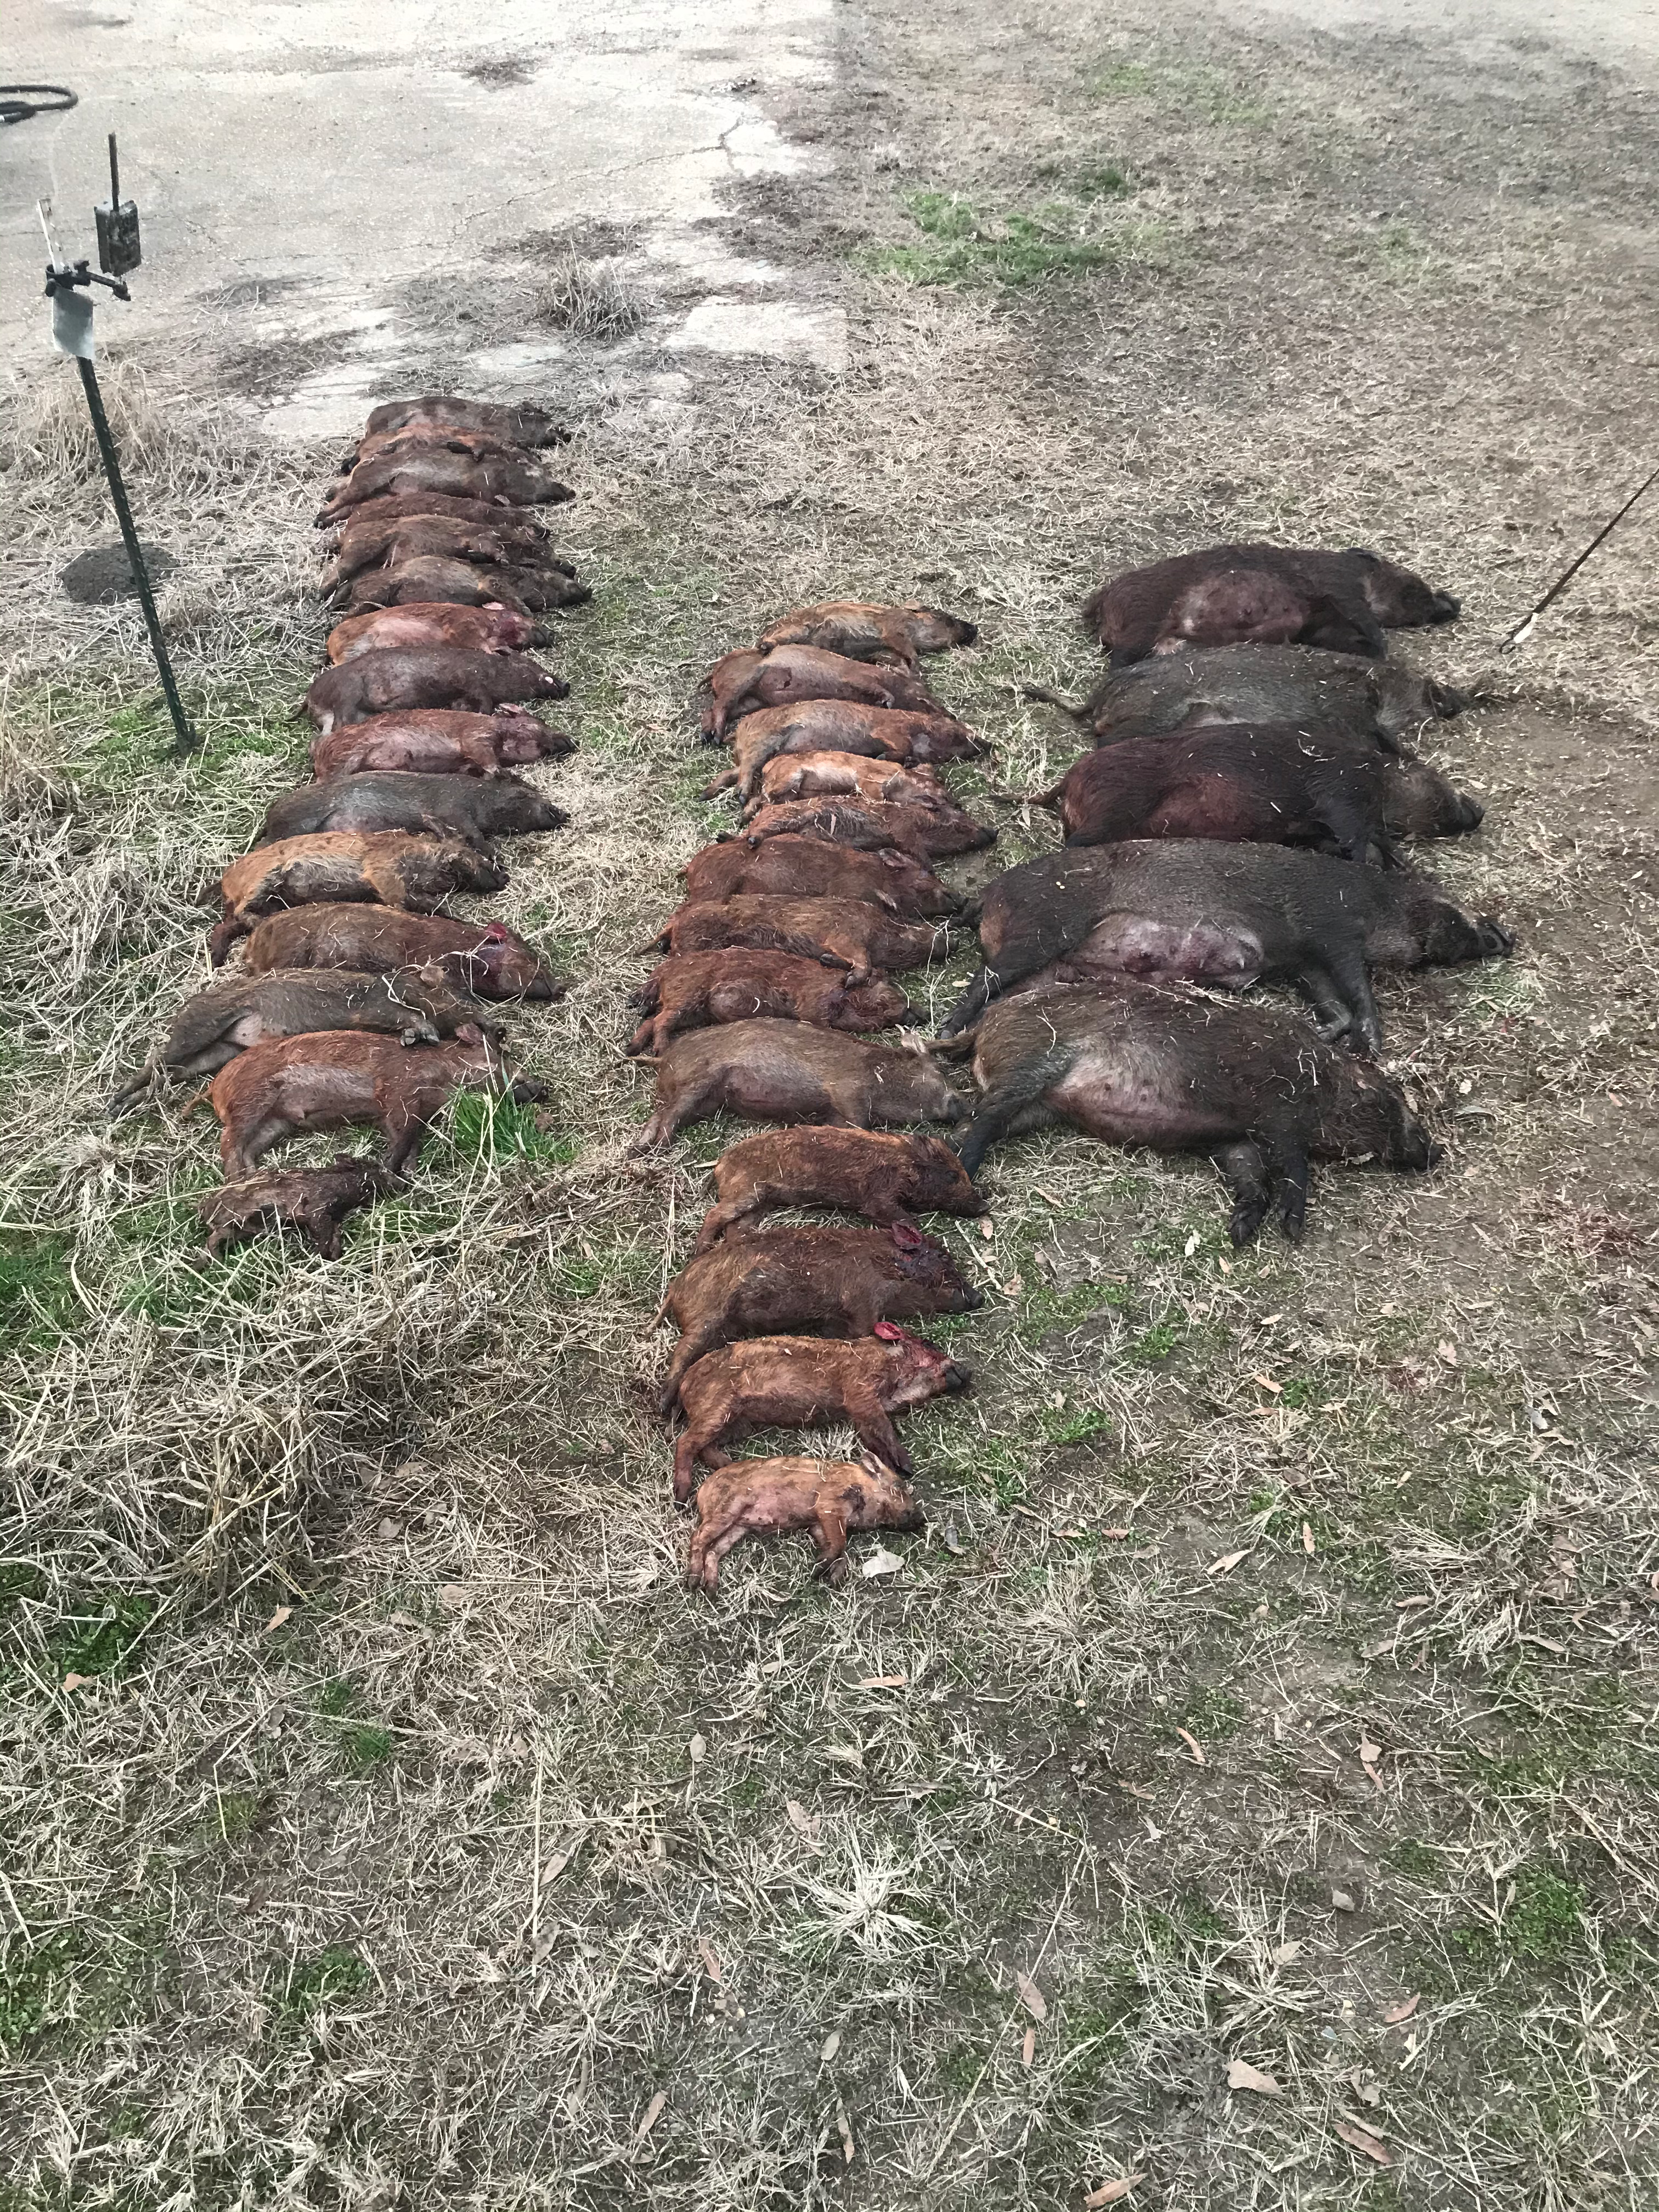 2 nights of conditioning. 1 minute. 35 pigs.